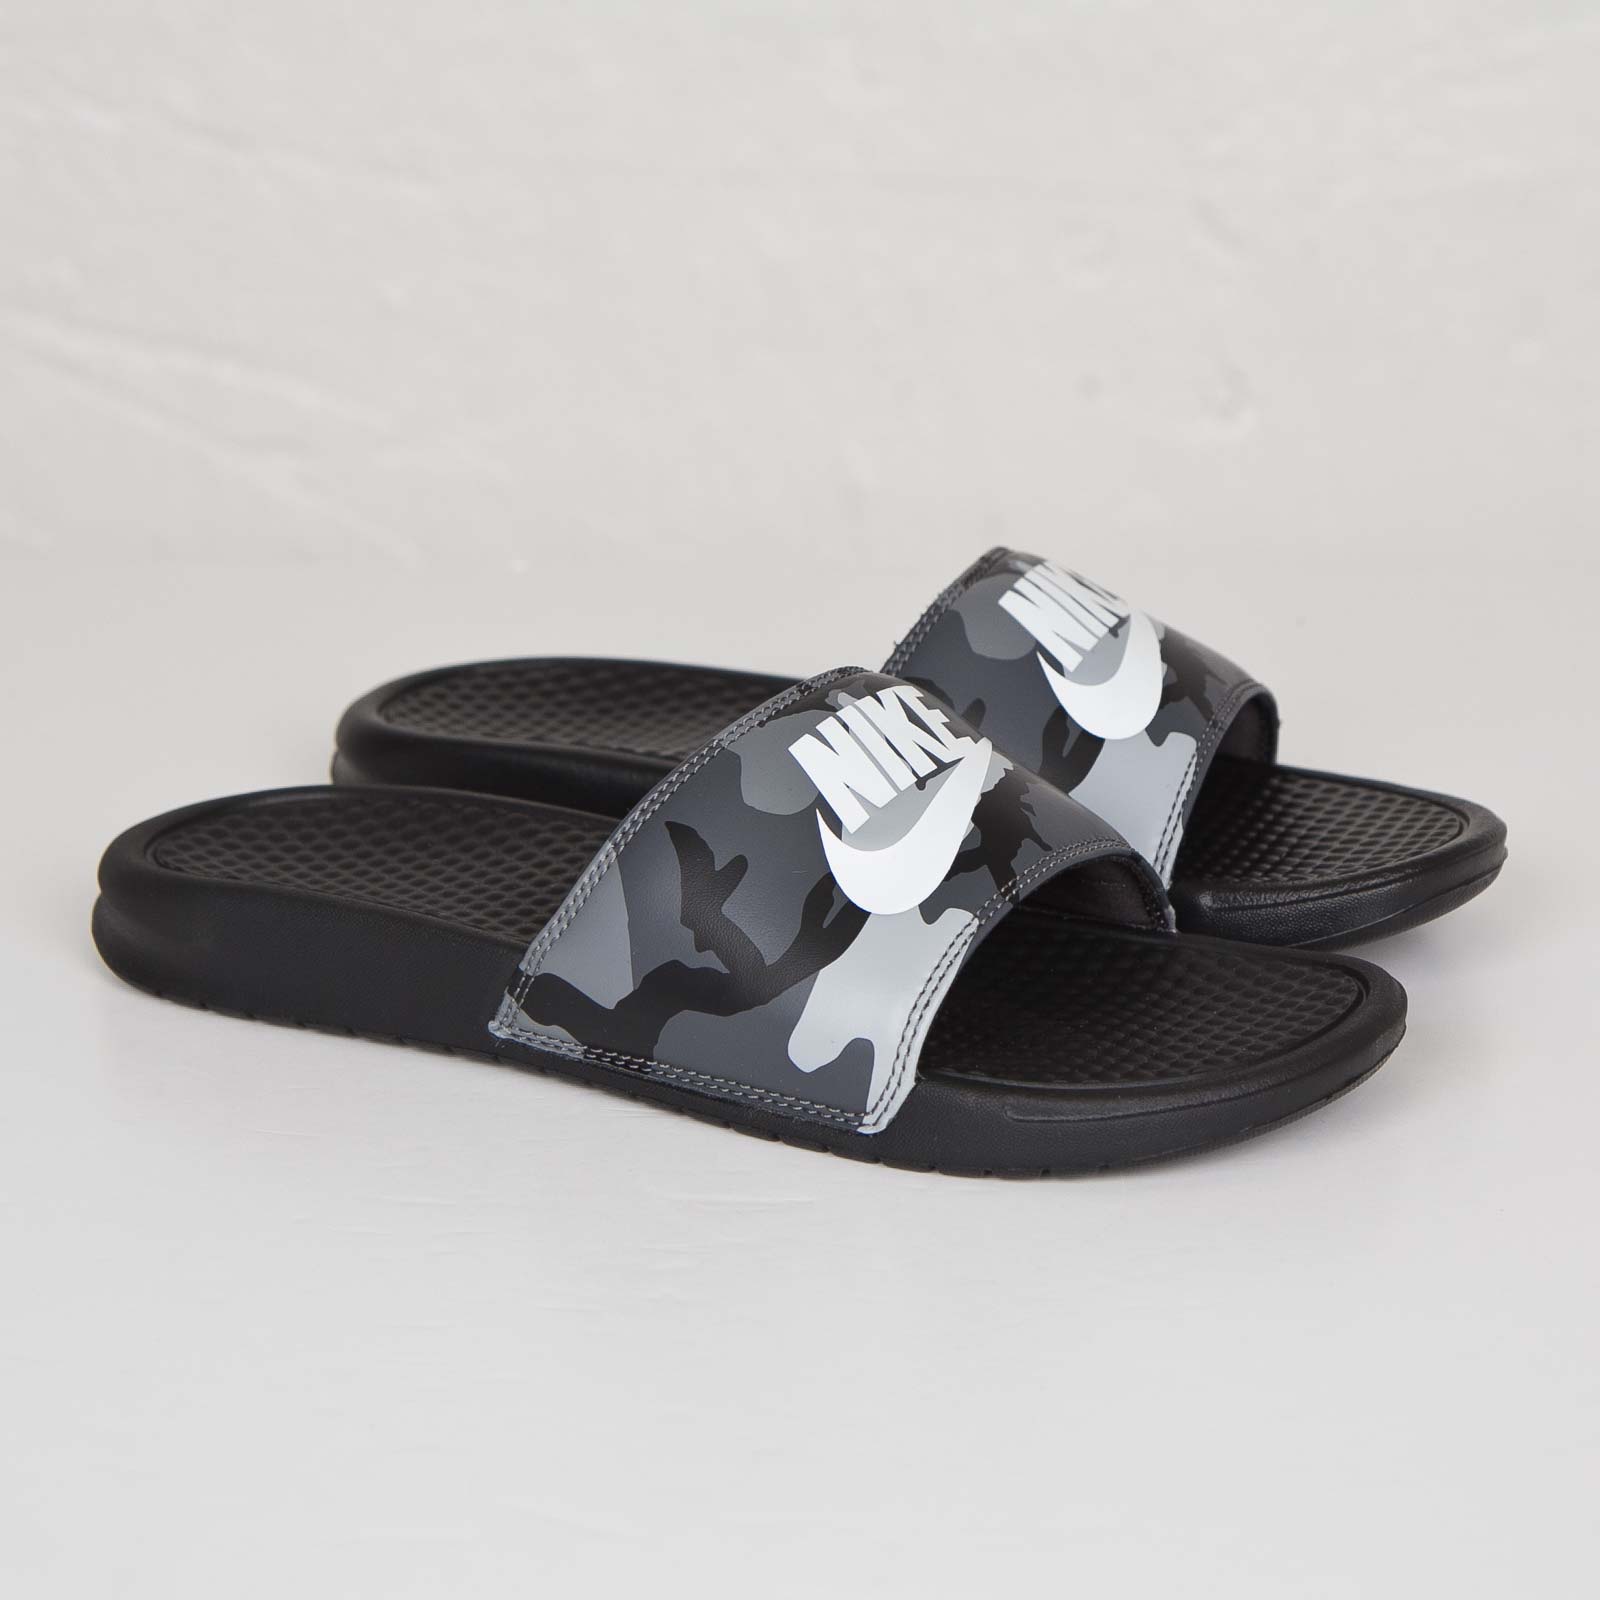 nike benassi soldes, ... Luxe solde nike benassi jdi print noir | luxe soldes toulouse,magasins pas chers toulouse ...